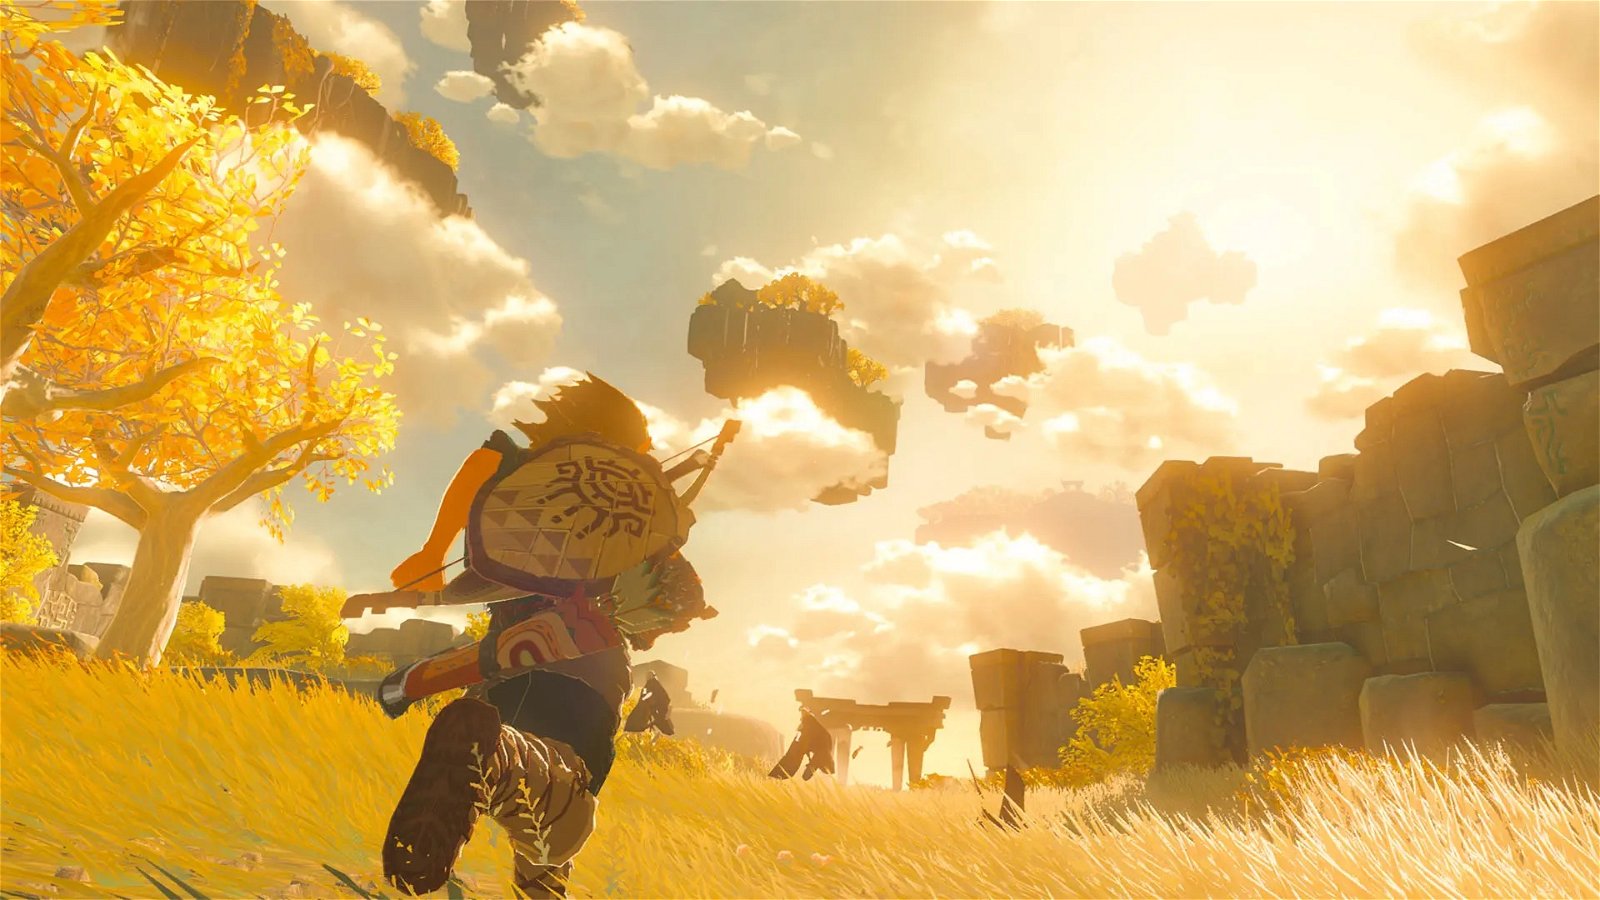 The Best Zelda Games to Prepare For Tears of the Kingdom